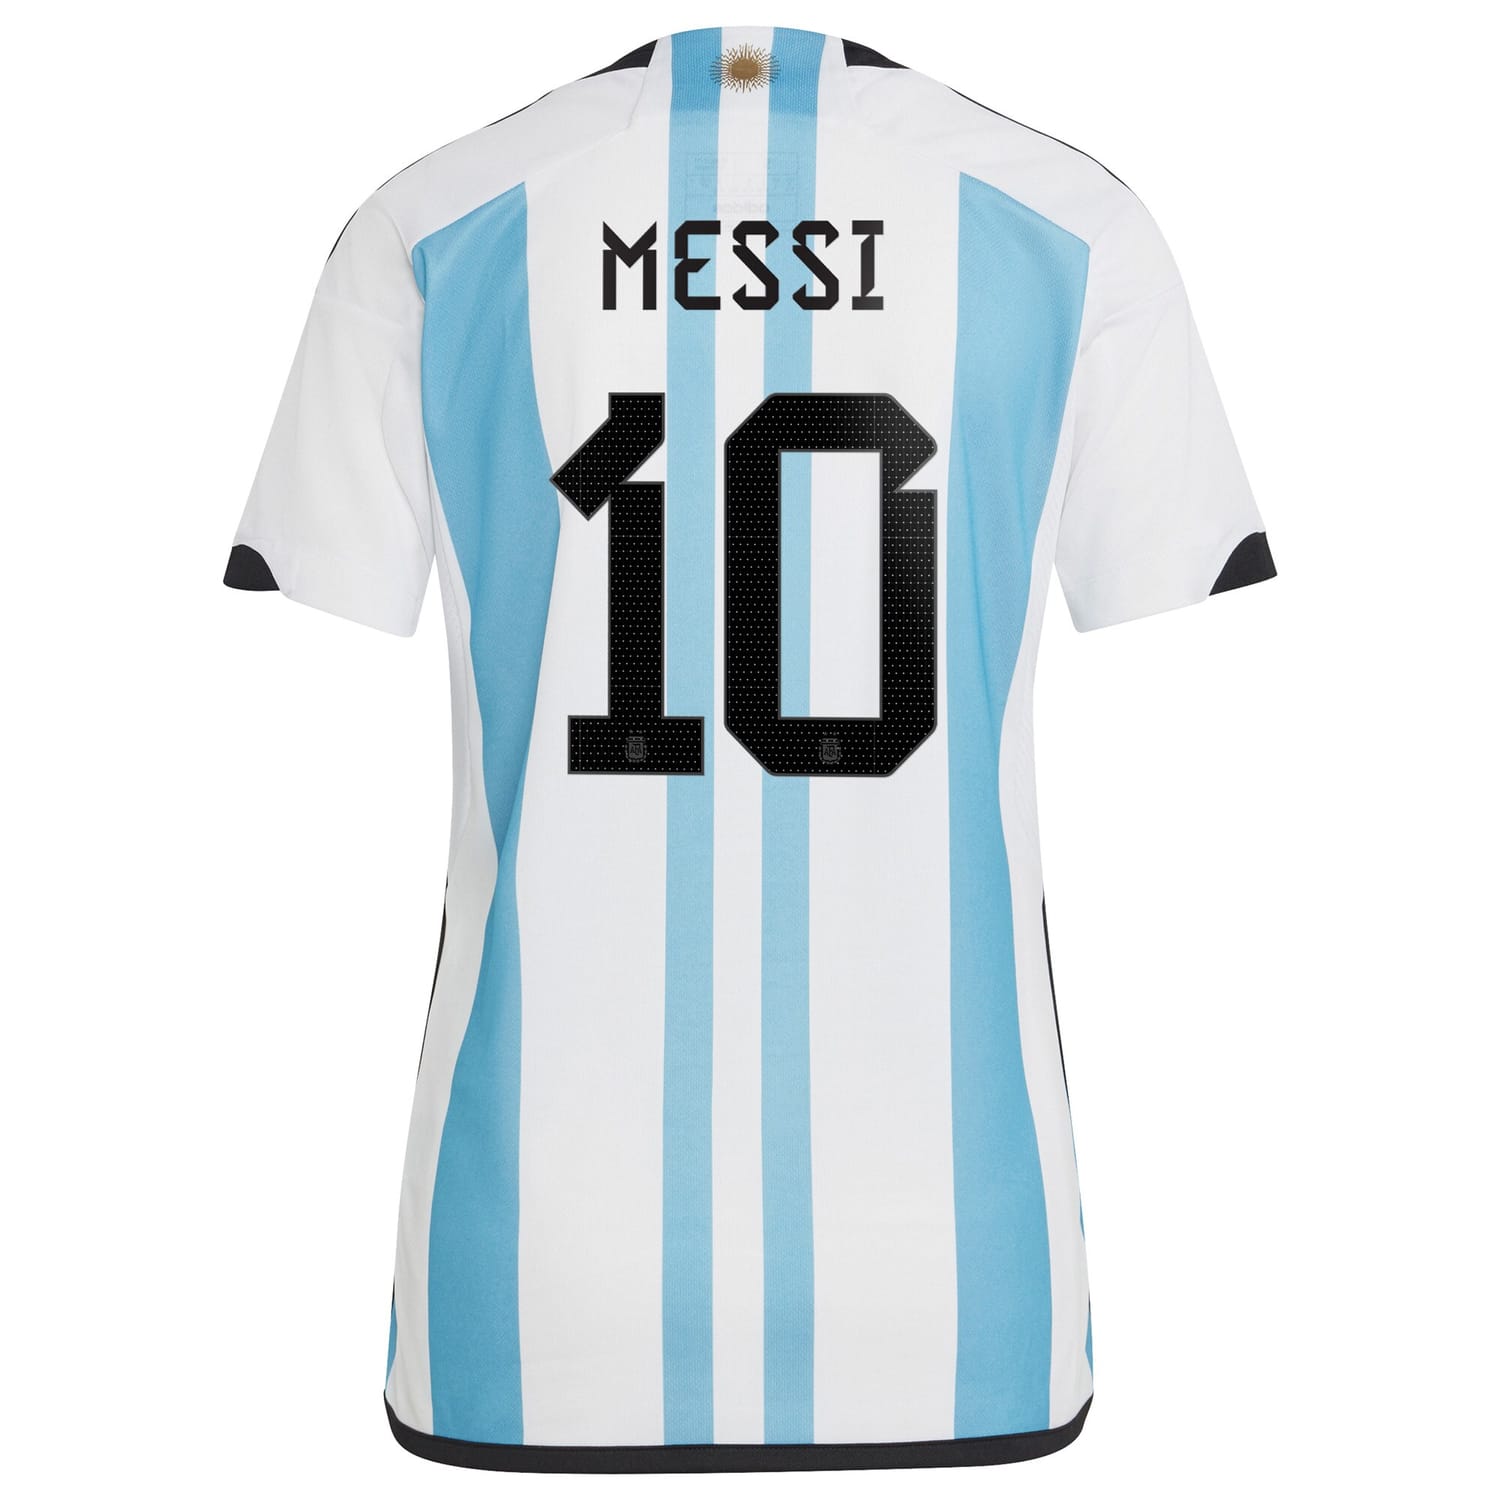 Champions Argentina National Team Home Winners Jersey Shirt White/Light Blue 2022 player Lionel Messi printing for Women